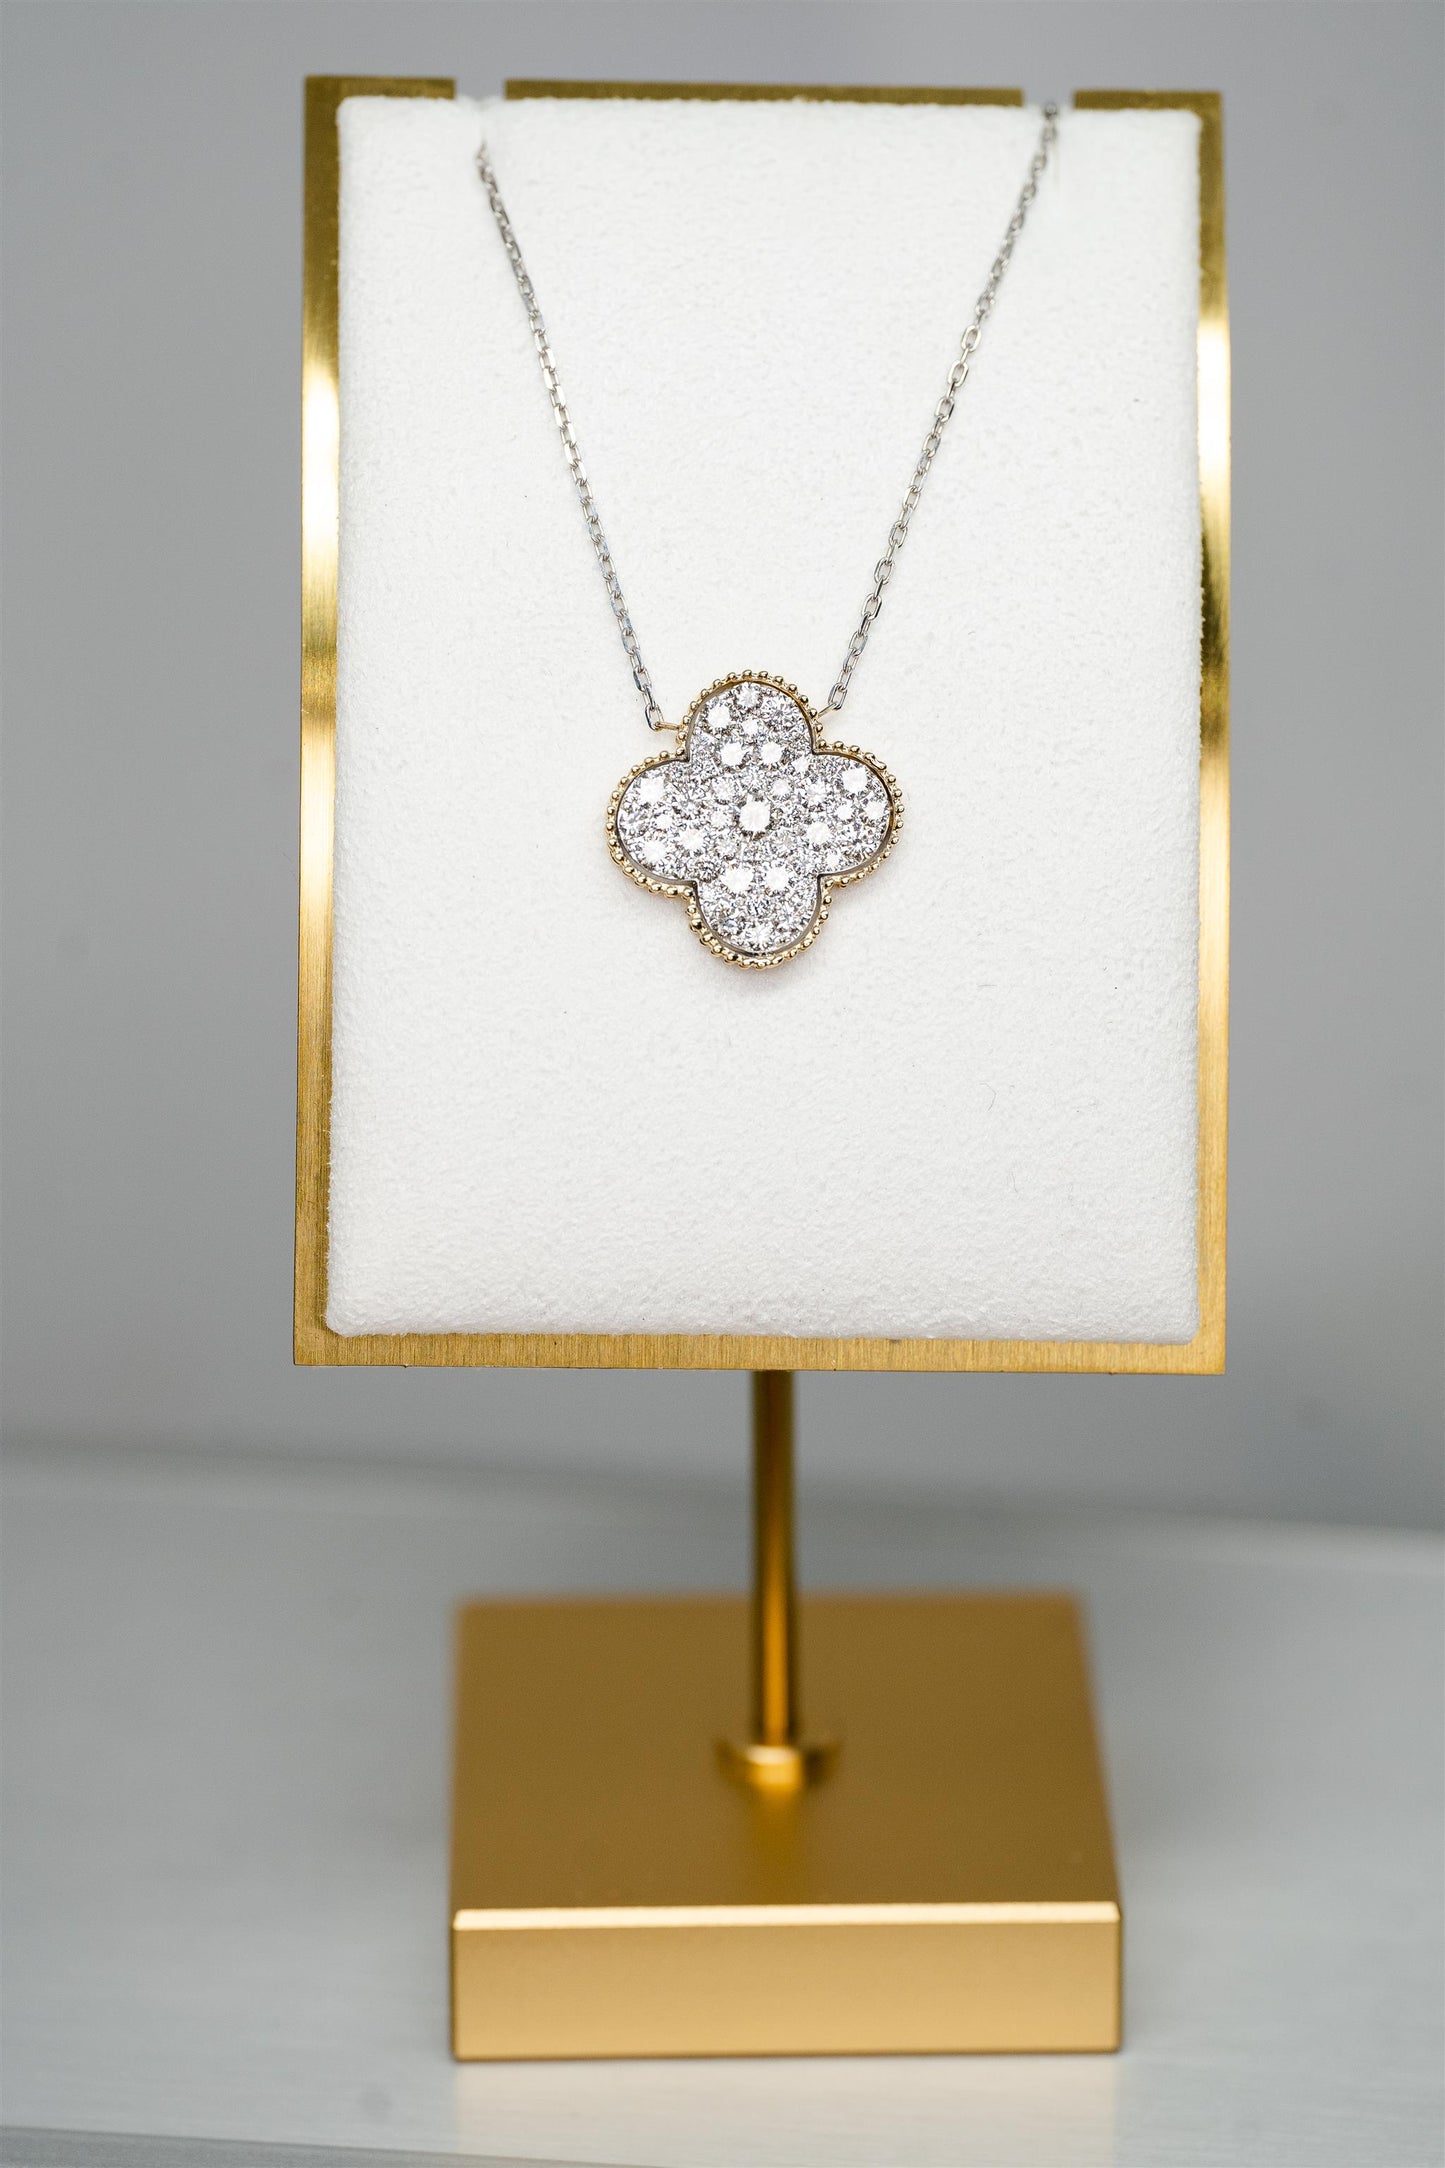 14K White and Yellow Gold 1.54tdw Diamond 4 Petal Floral Flat Pendant on an 18" Diamond Cut Cable Chain